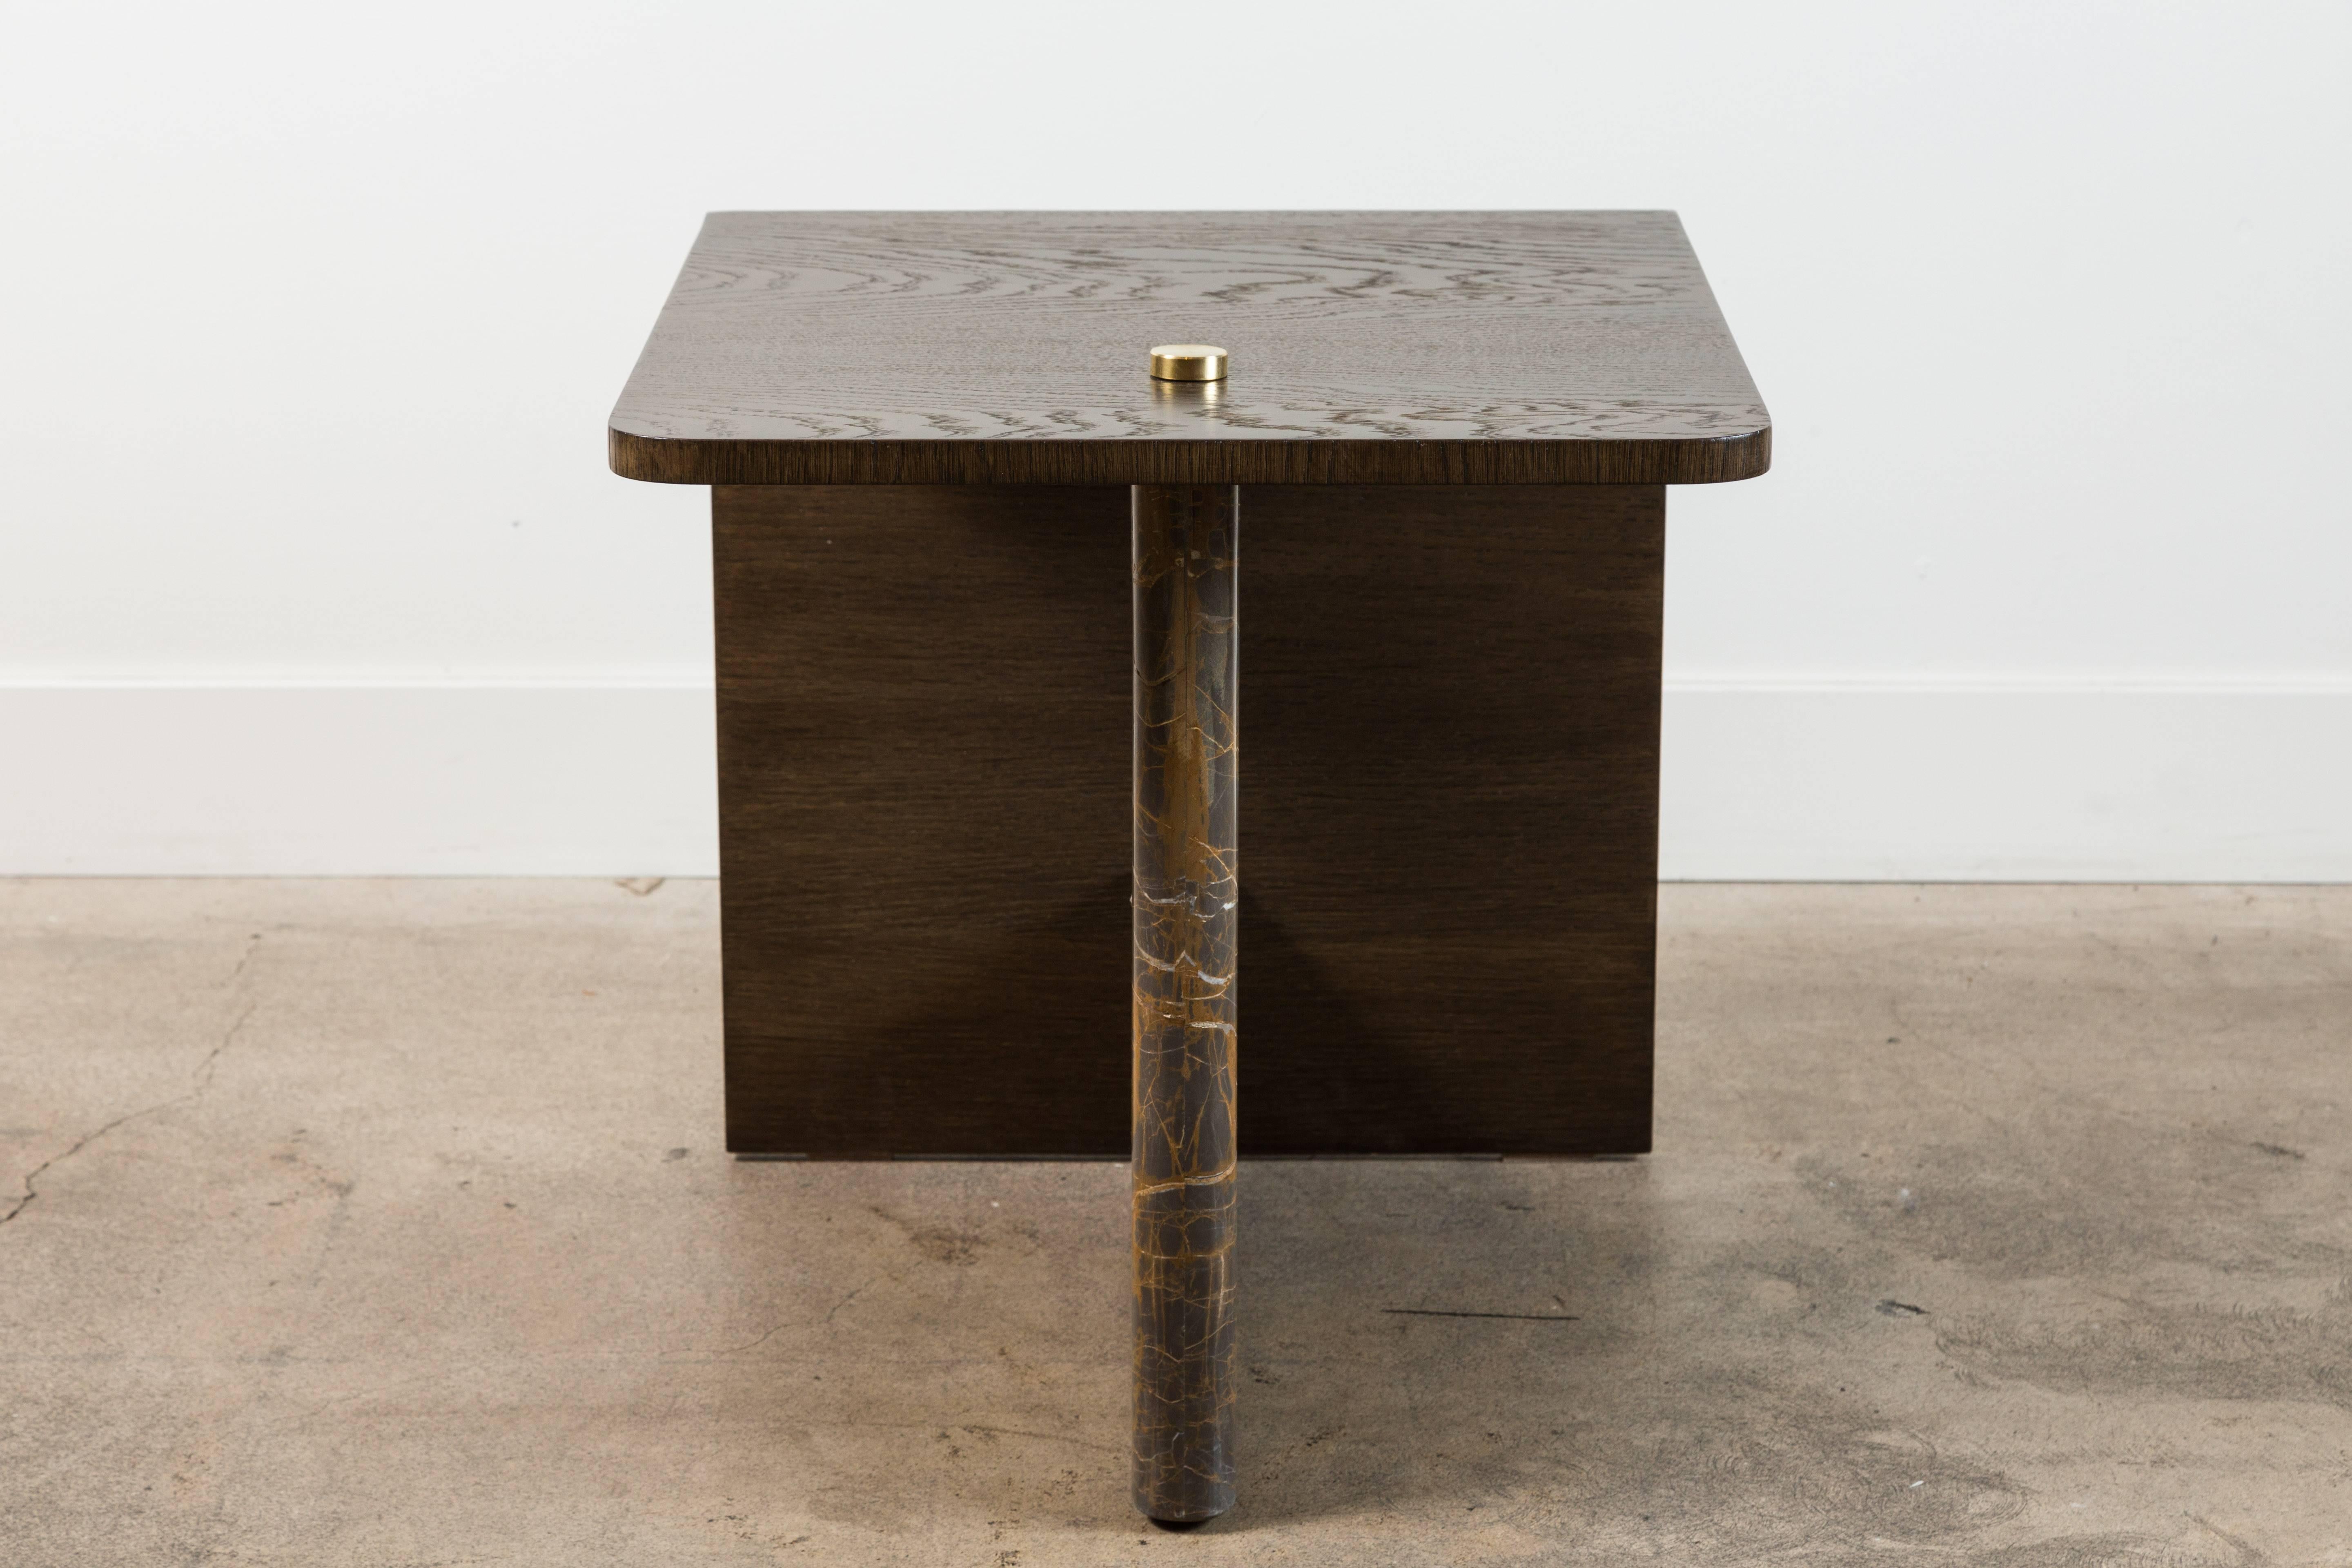 The Huxley Side Table features a waterfall oak or walnut top, a stepped stone base and brass details.

Available to order in various finishes with a 10-12 week lead time.